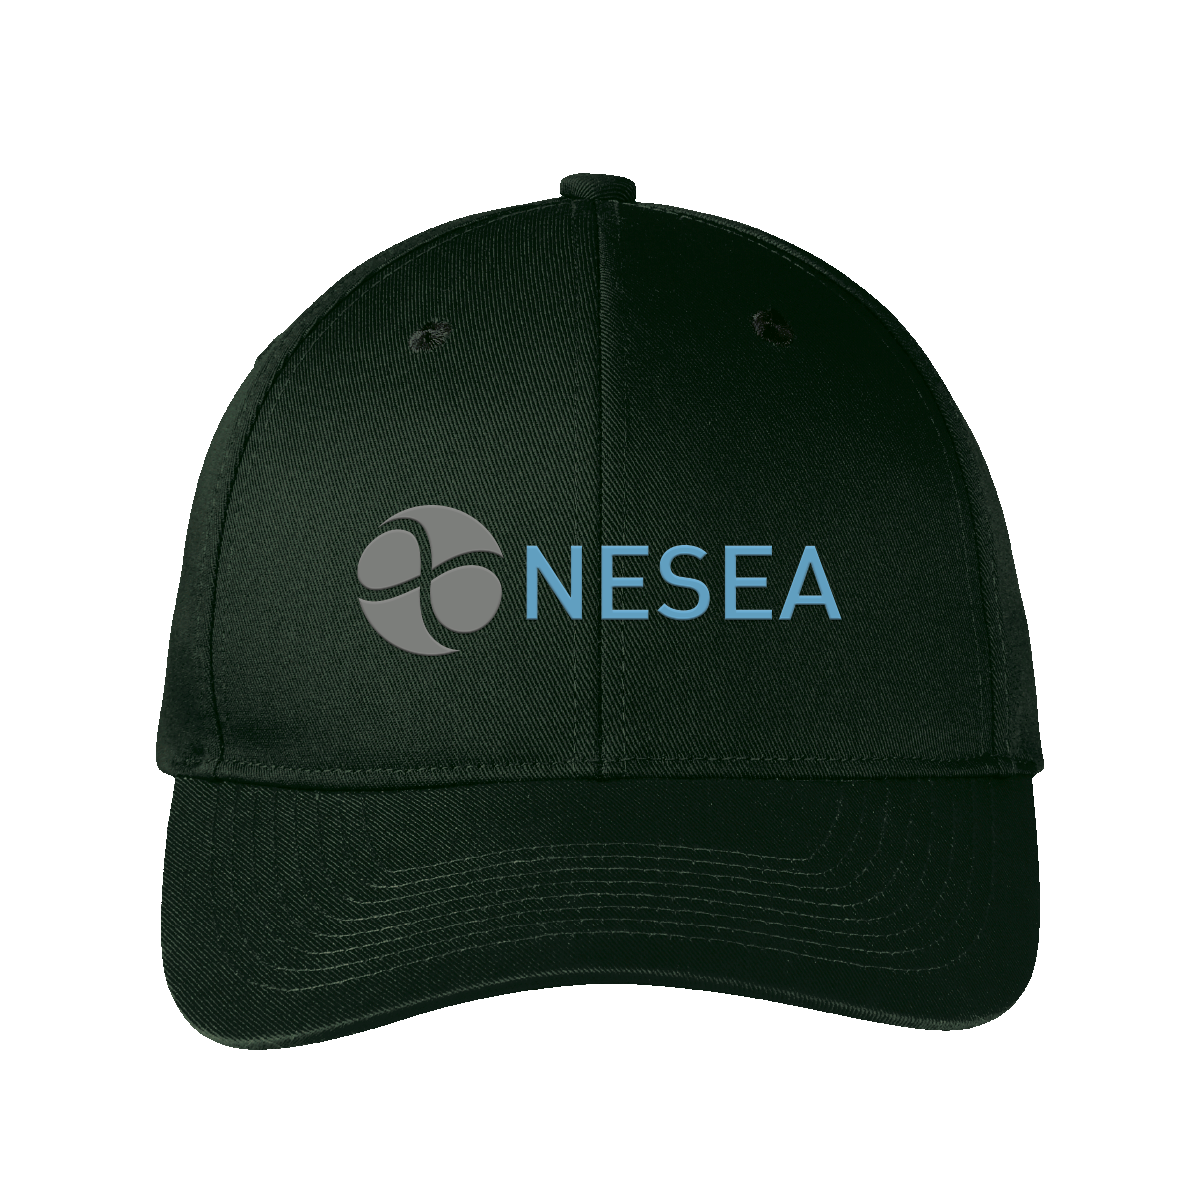 NESEA Baseball Hat (currently available in 3 colors)